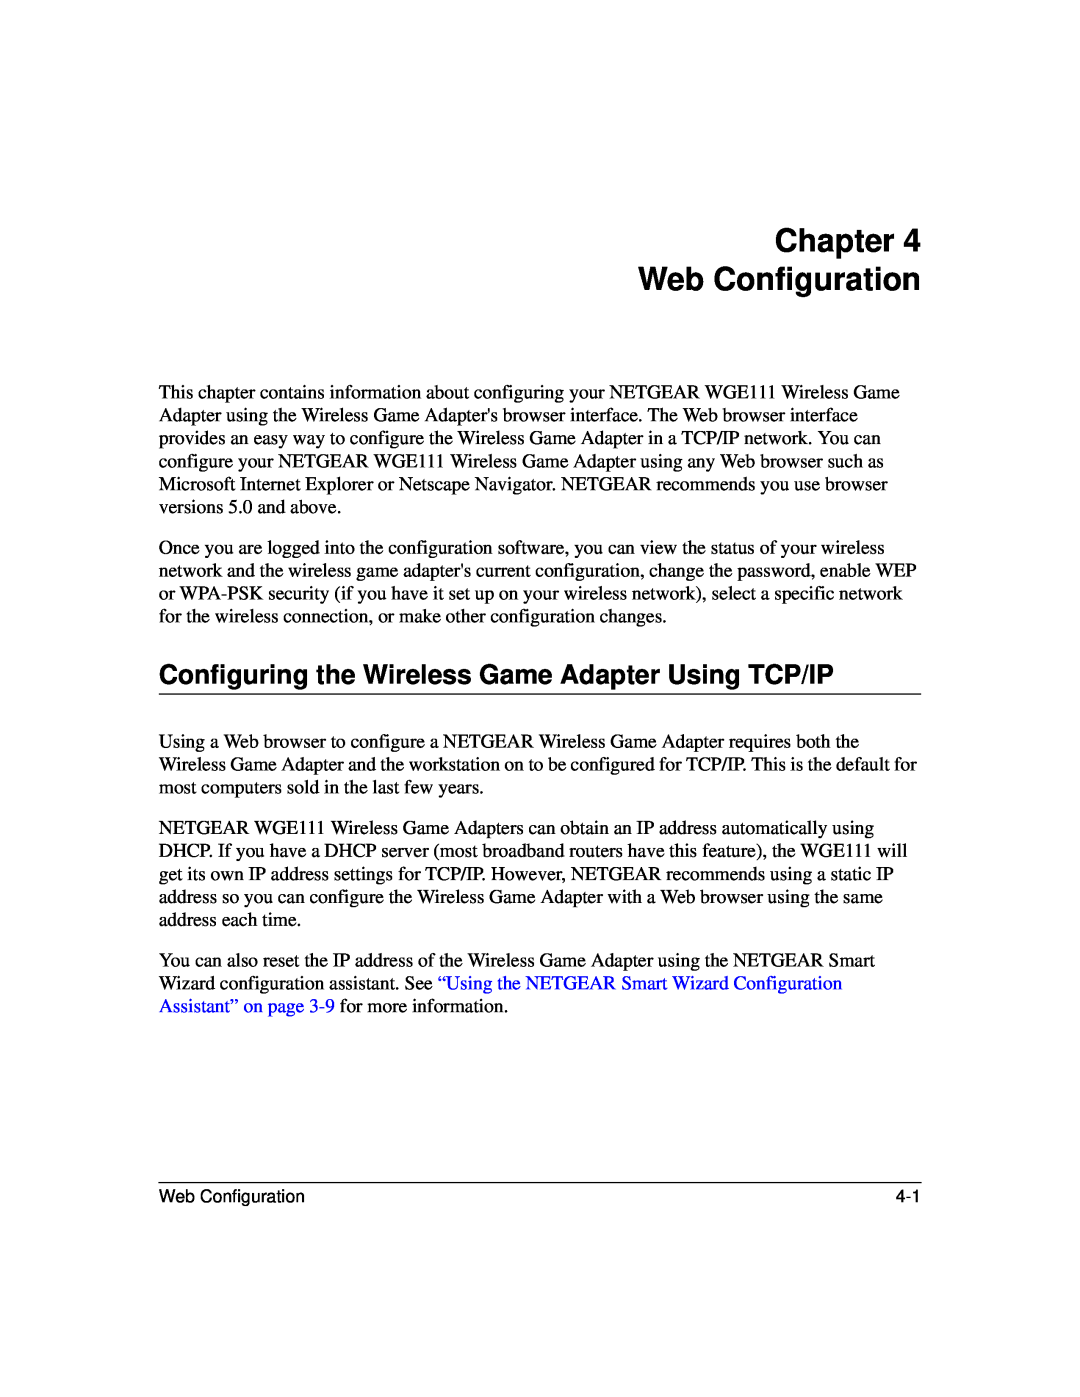 NETGEAR WGE111 user manual Chapter Web Configuration, Configuring the Wireless Game Adapter Using TCP/IP 